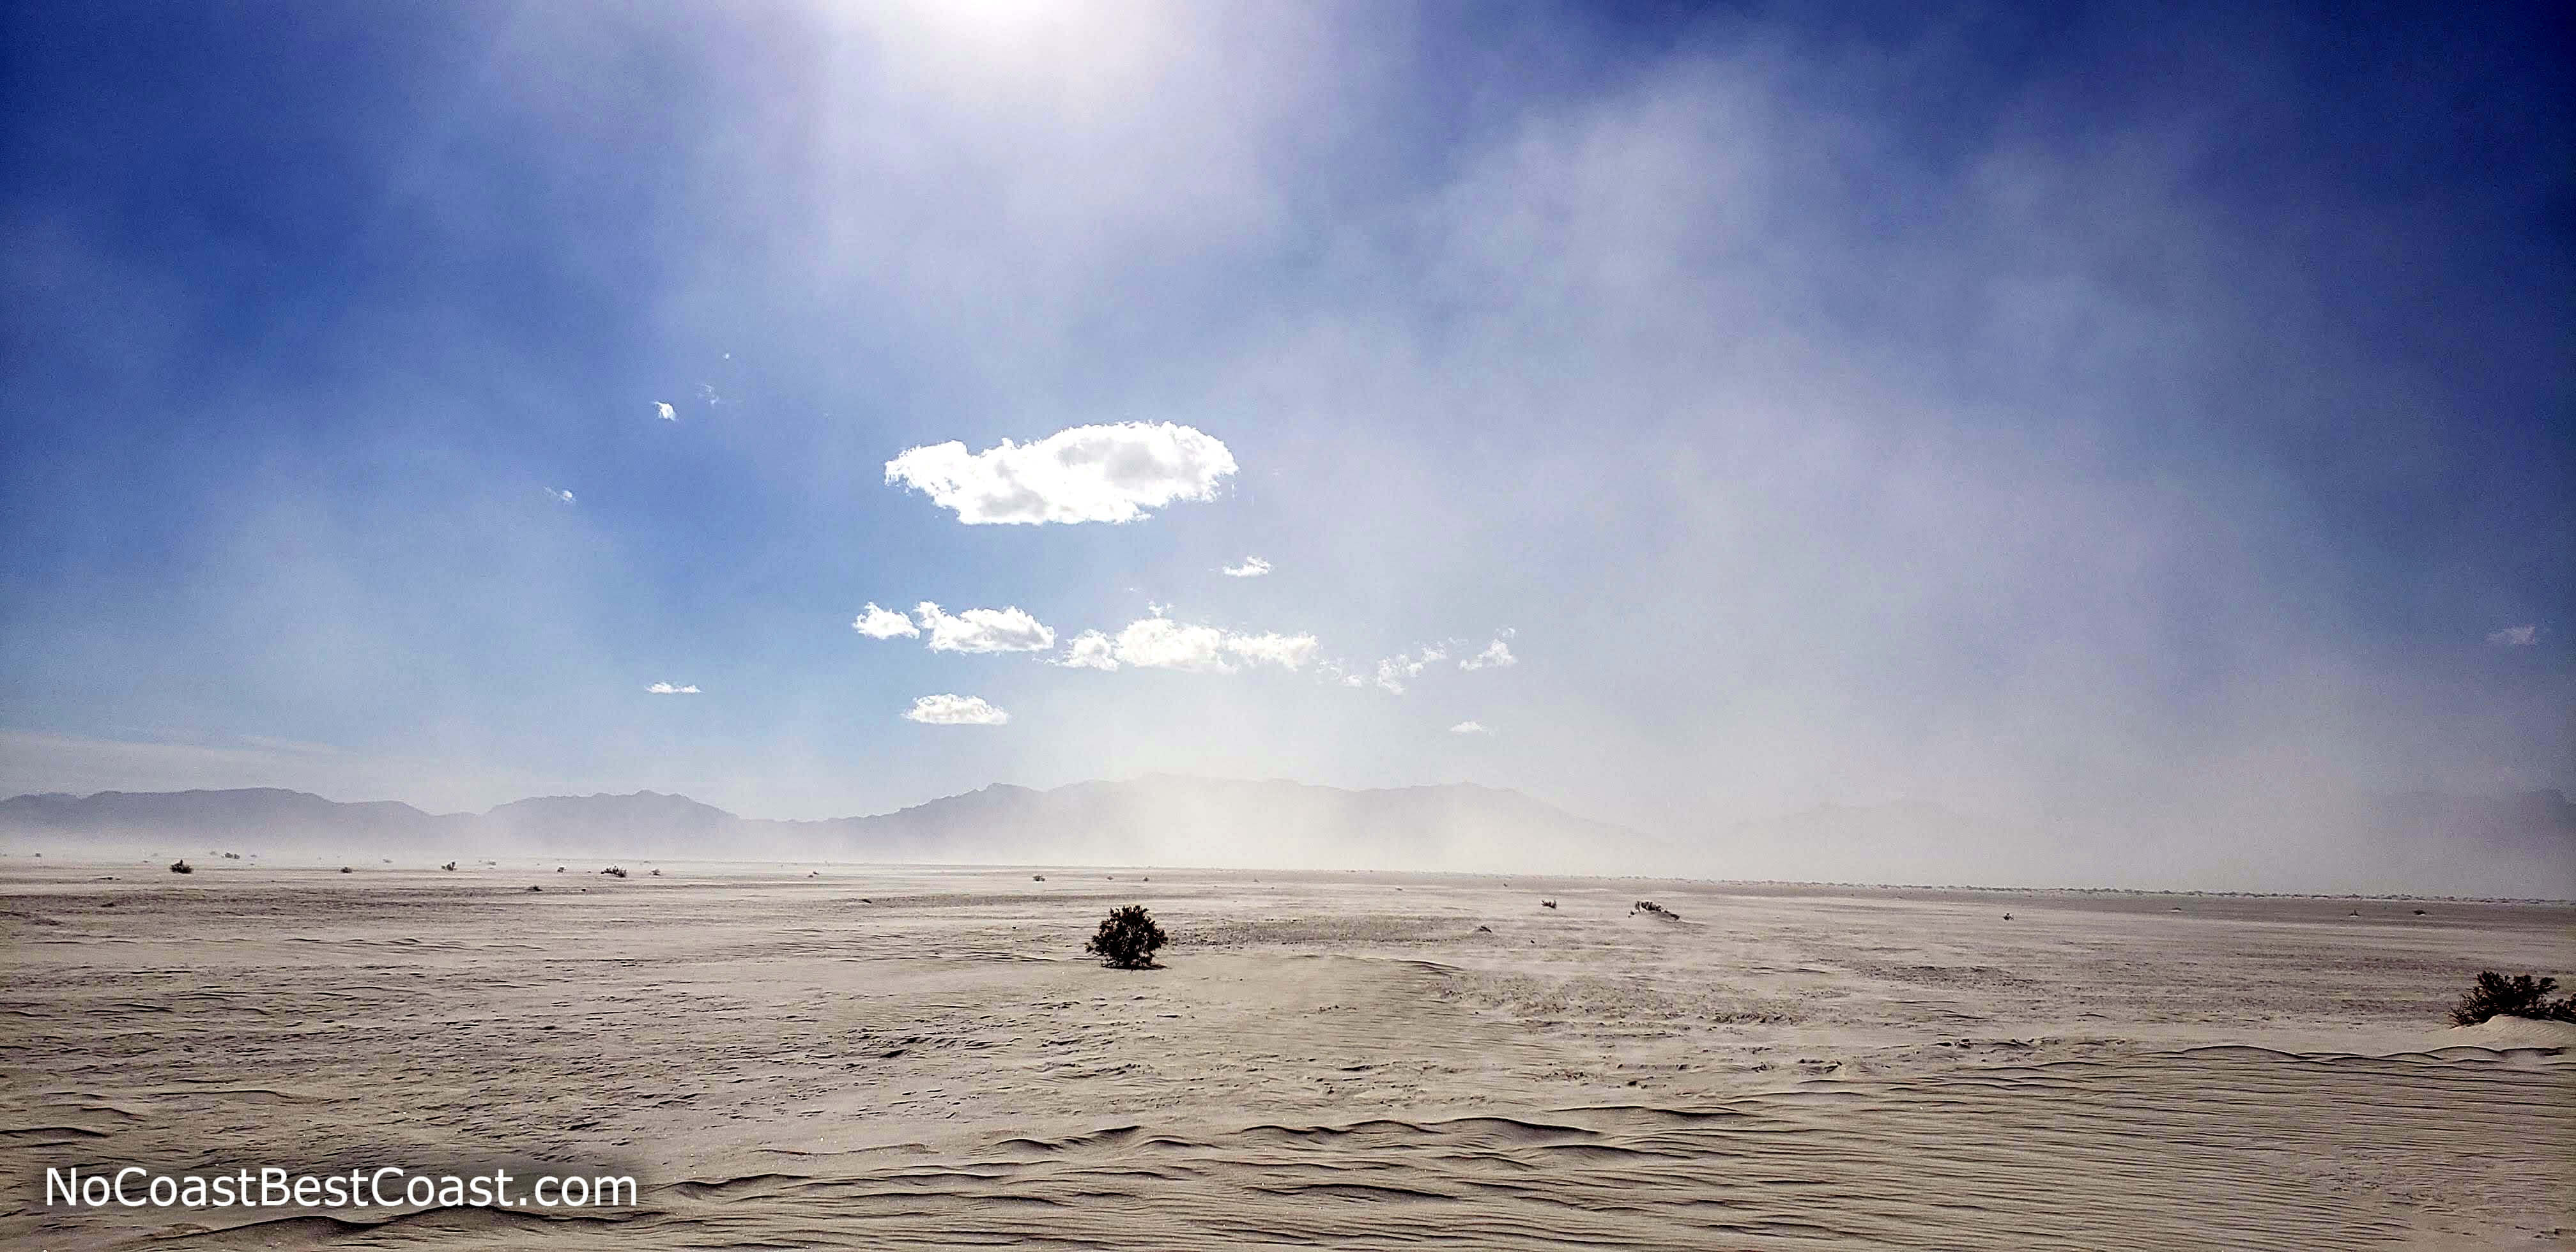 A lone shrub on the barren Alkali Flat with dust clouds obscuring the San Andres Mountains